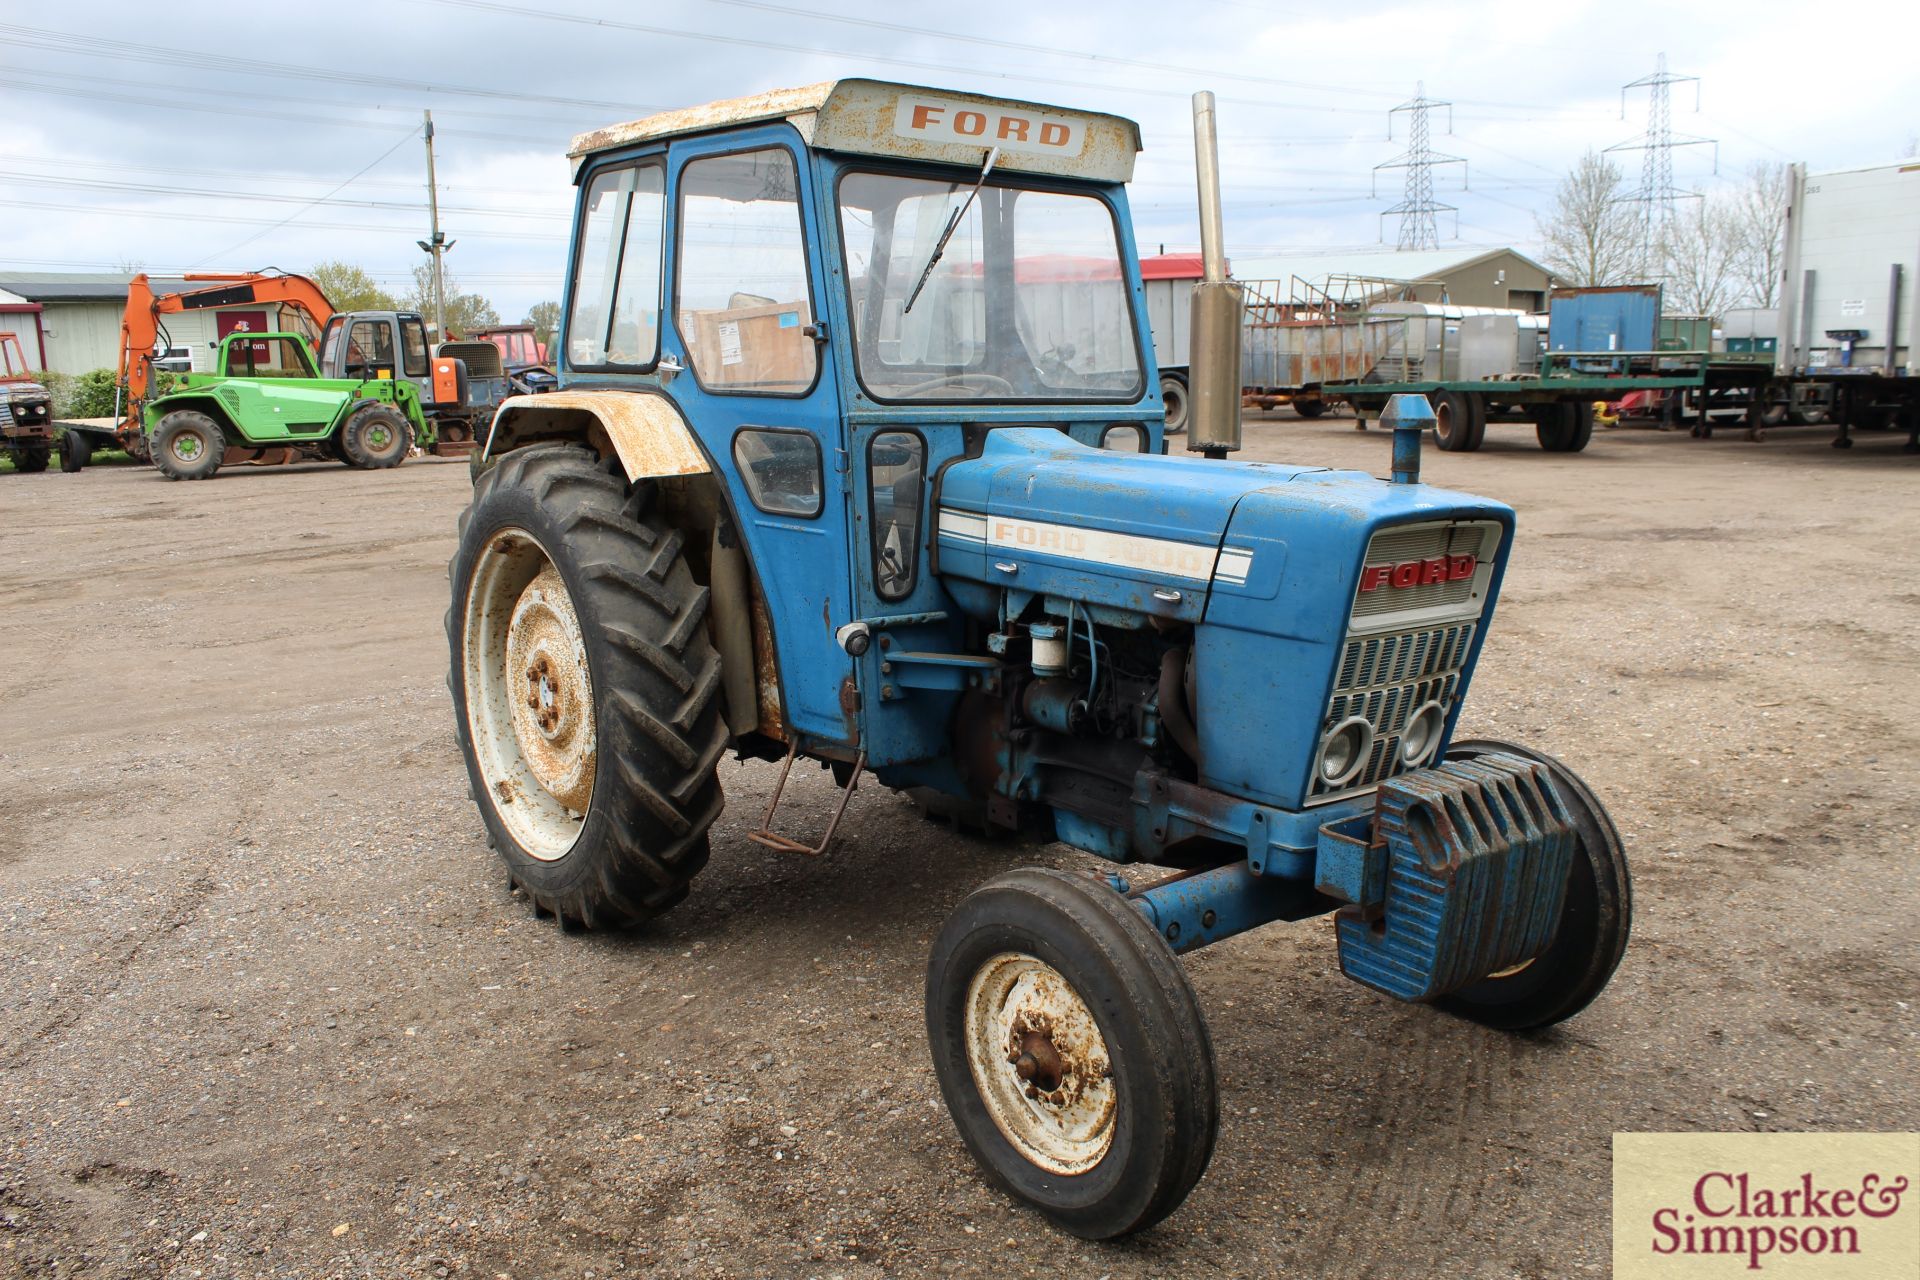 Ford 4000 2WD tractor. Registration JRT 680N. Date of first registration 07/1975. 5,859 hours. 12.